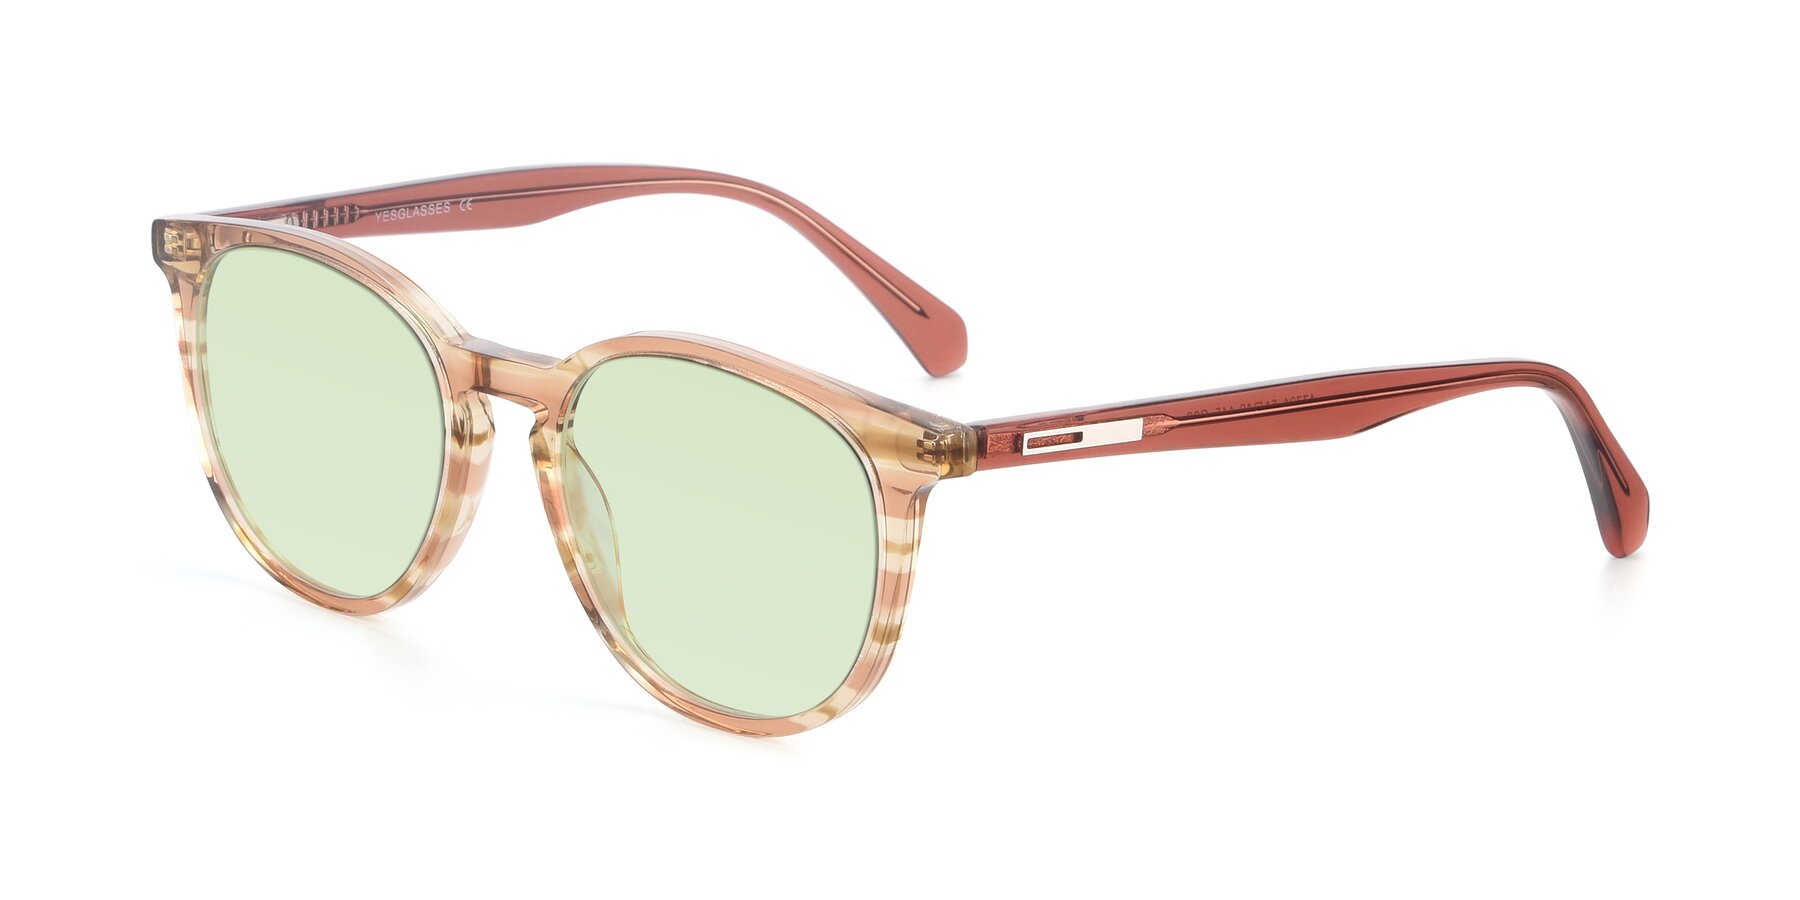 Angle of 17721 in Stripe Caramel with Light Green Tinted Lenses